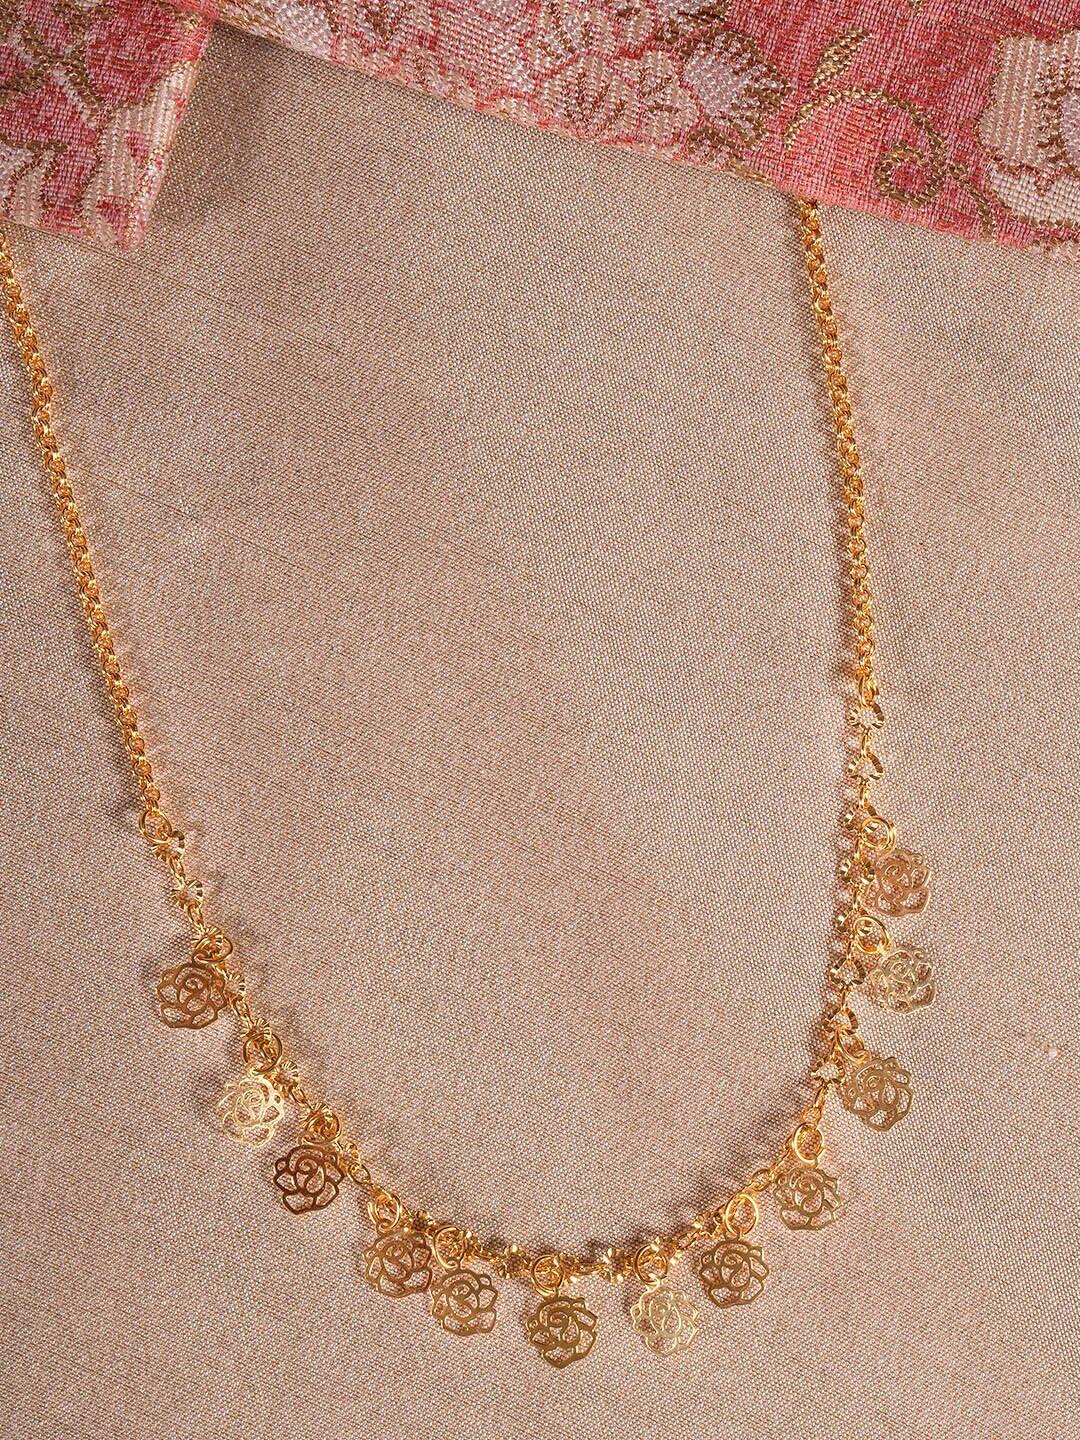 shoshaa gold-plated handcrafted necklace